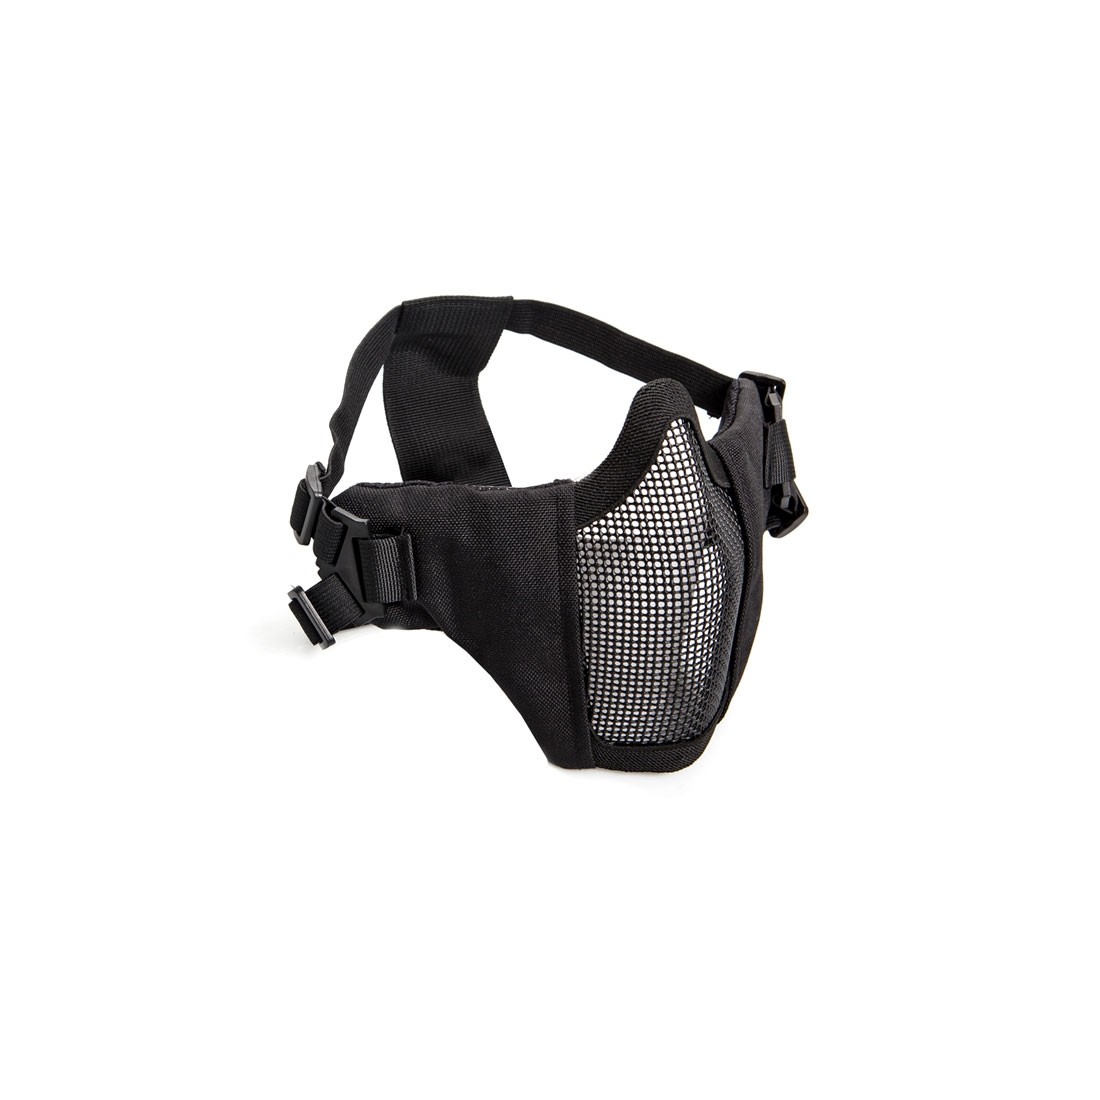 ASG Lower Face Mesh Mask with Cheek Pads Black